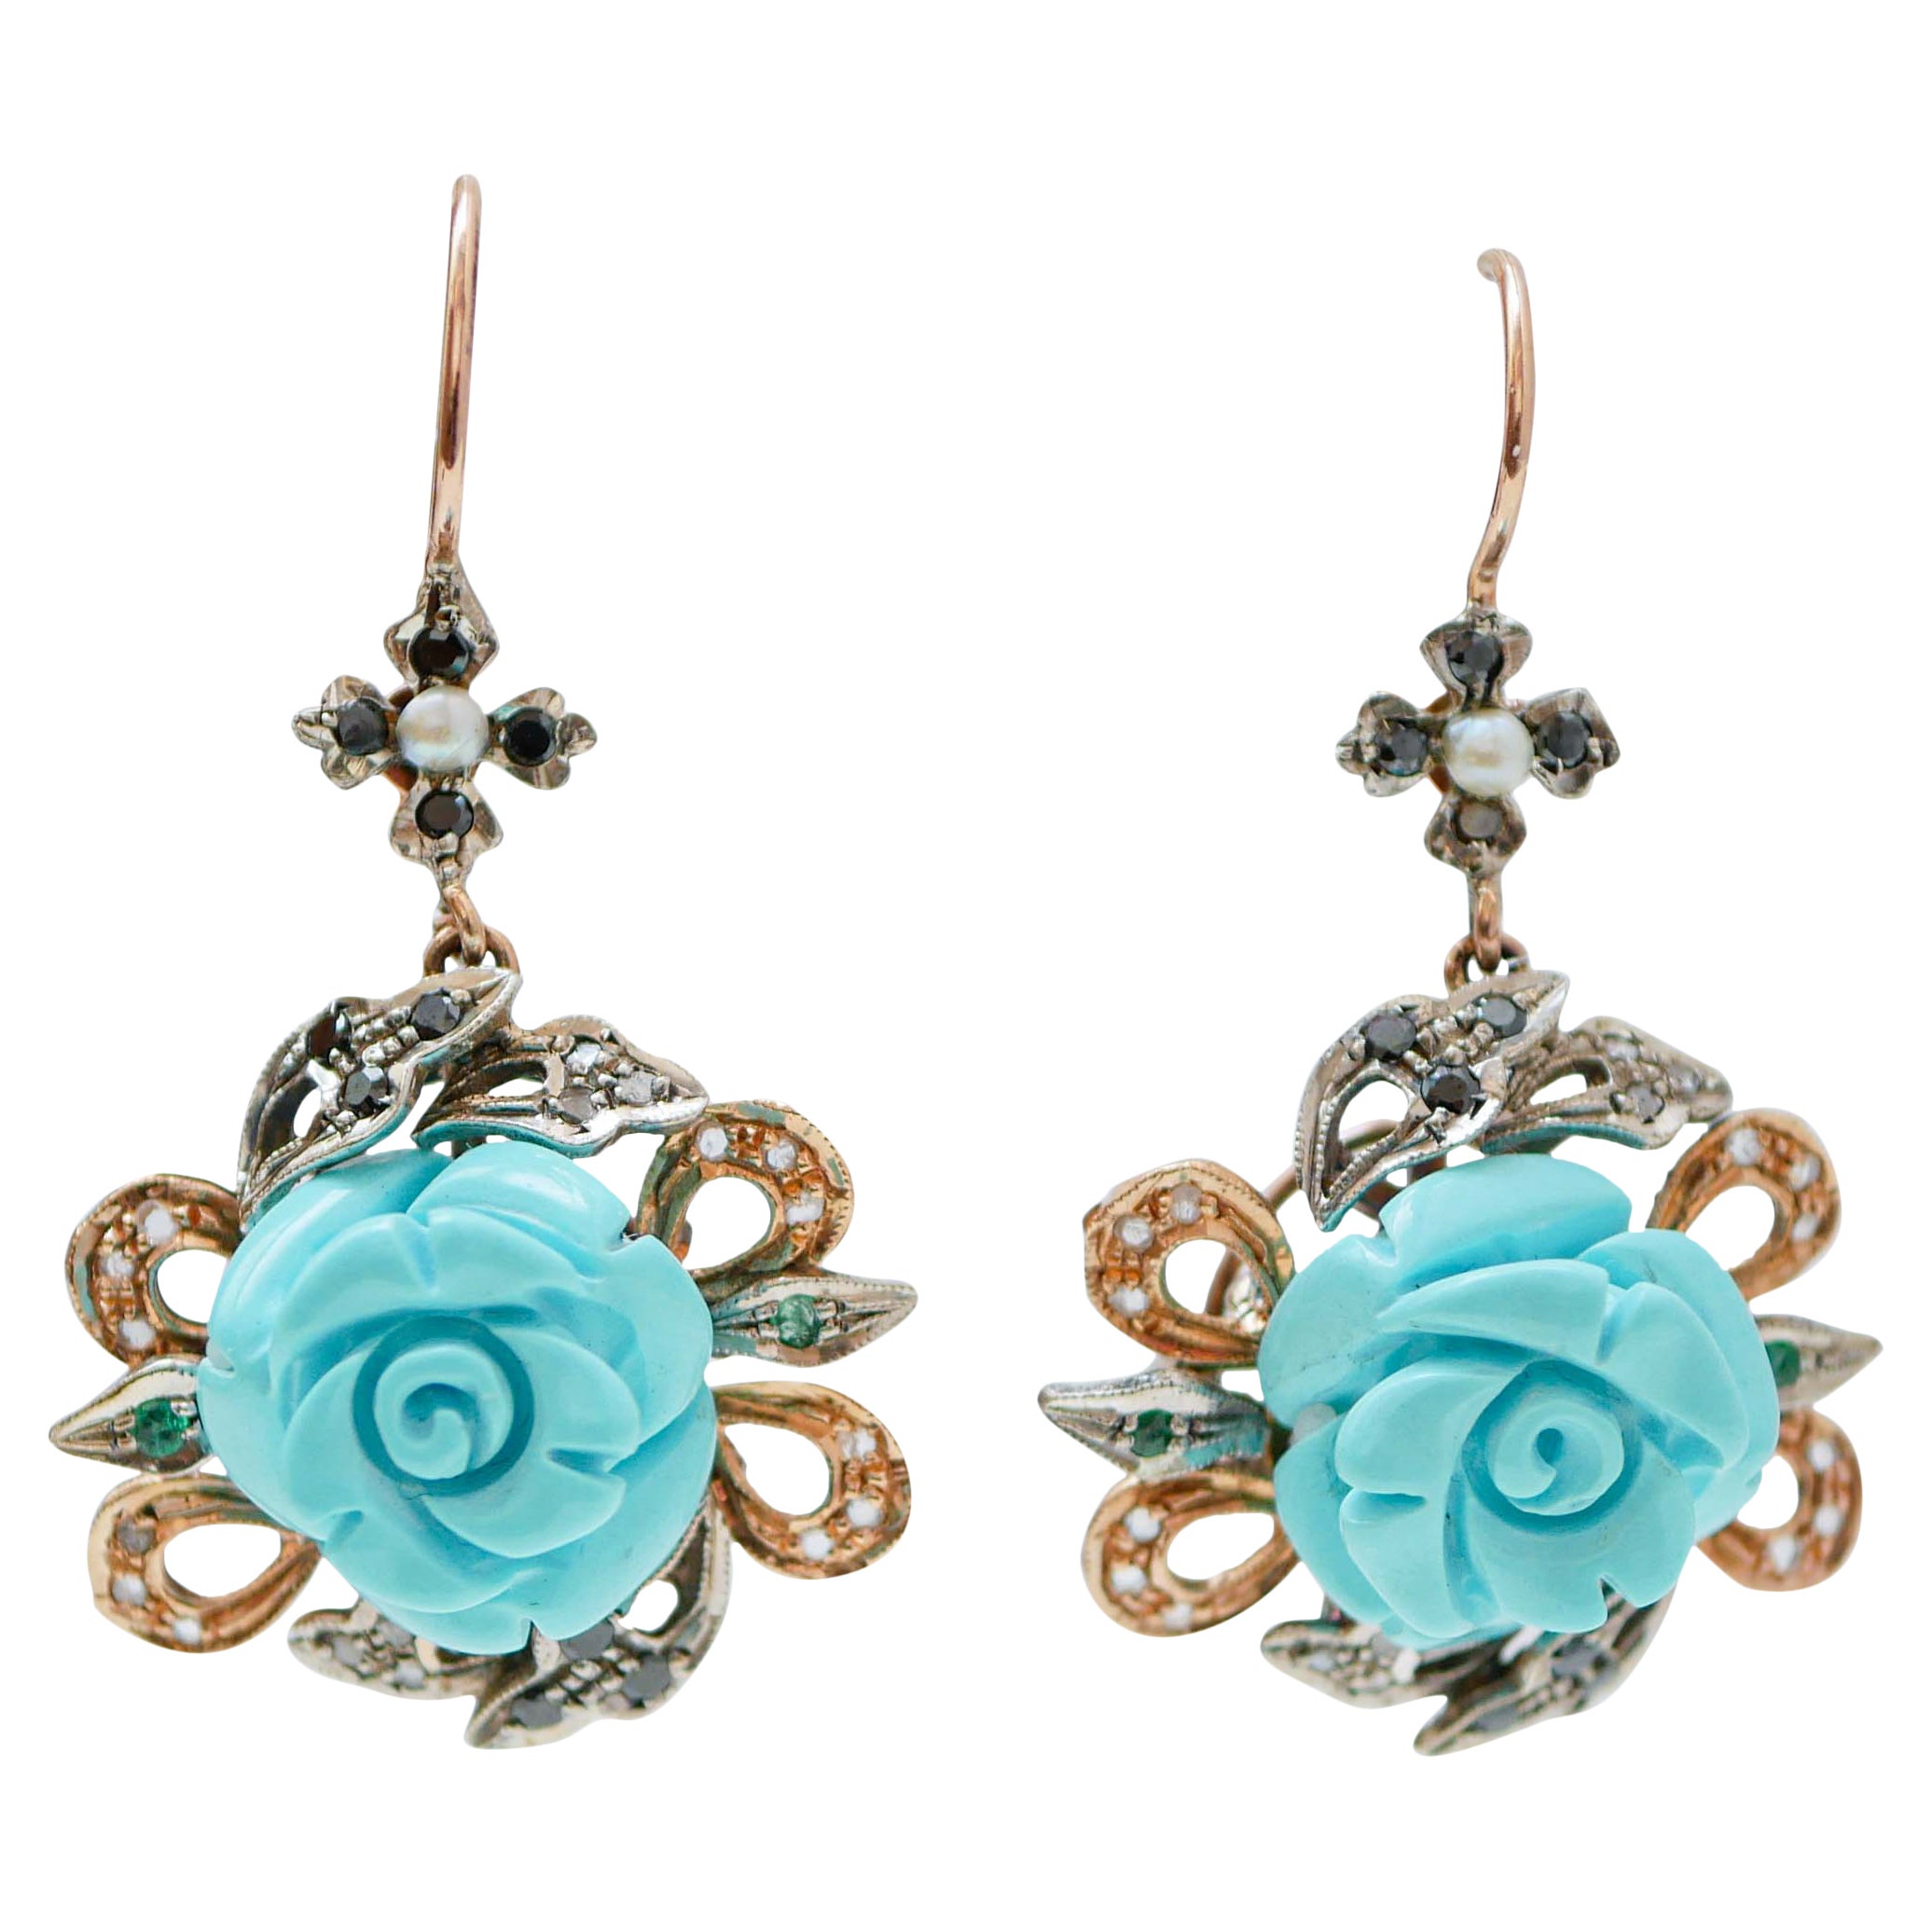 Turquoise, Pearls, Emeralds, Stones, Diamonds, Rose Gold and Silver Earrings.